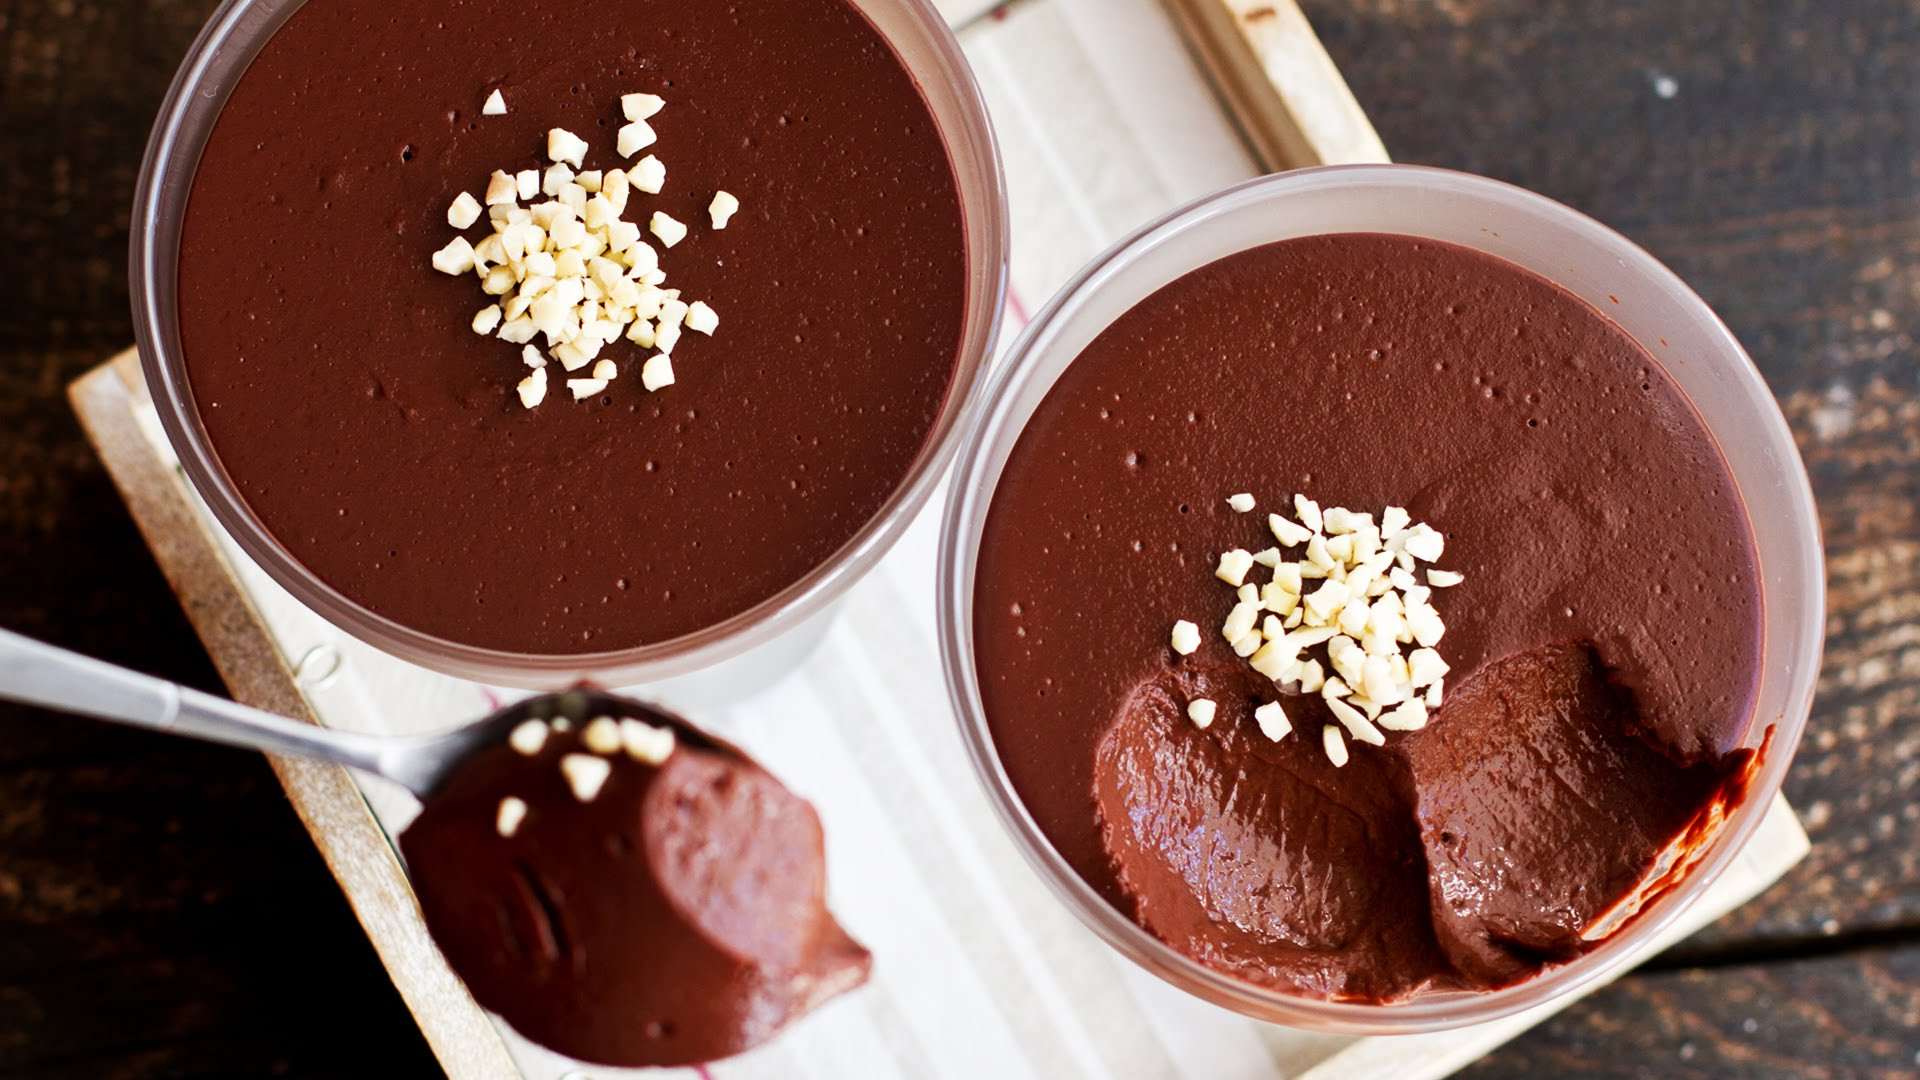 Easy Chocolate Puddings Recipes
 So Easy To Prepare And Totally Irresistible Creamy